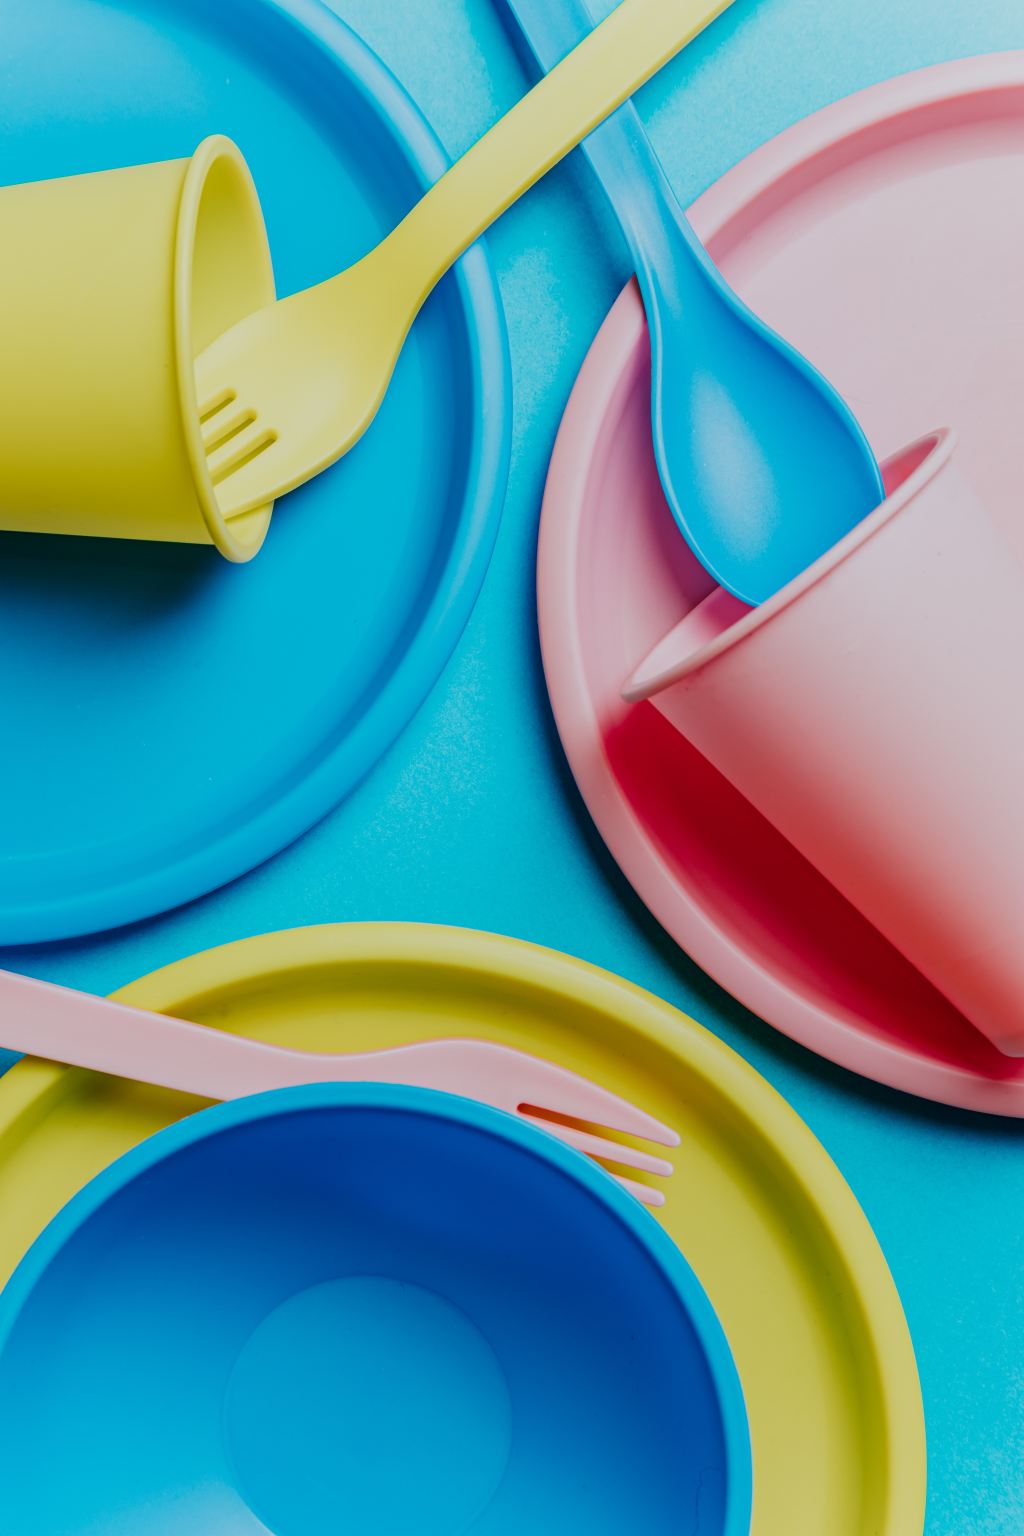 cutlery and utensils on a blue background